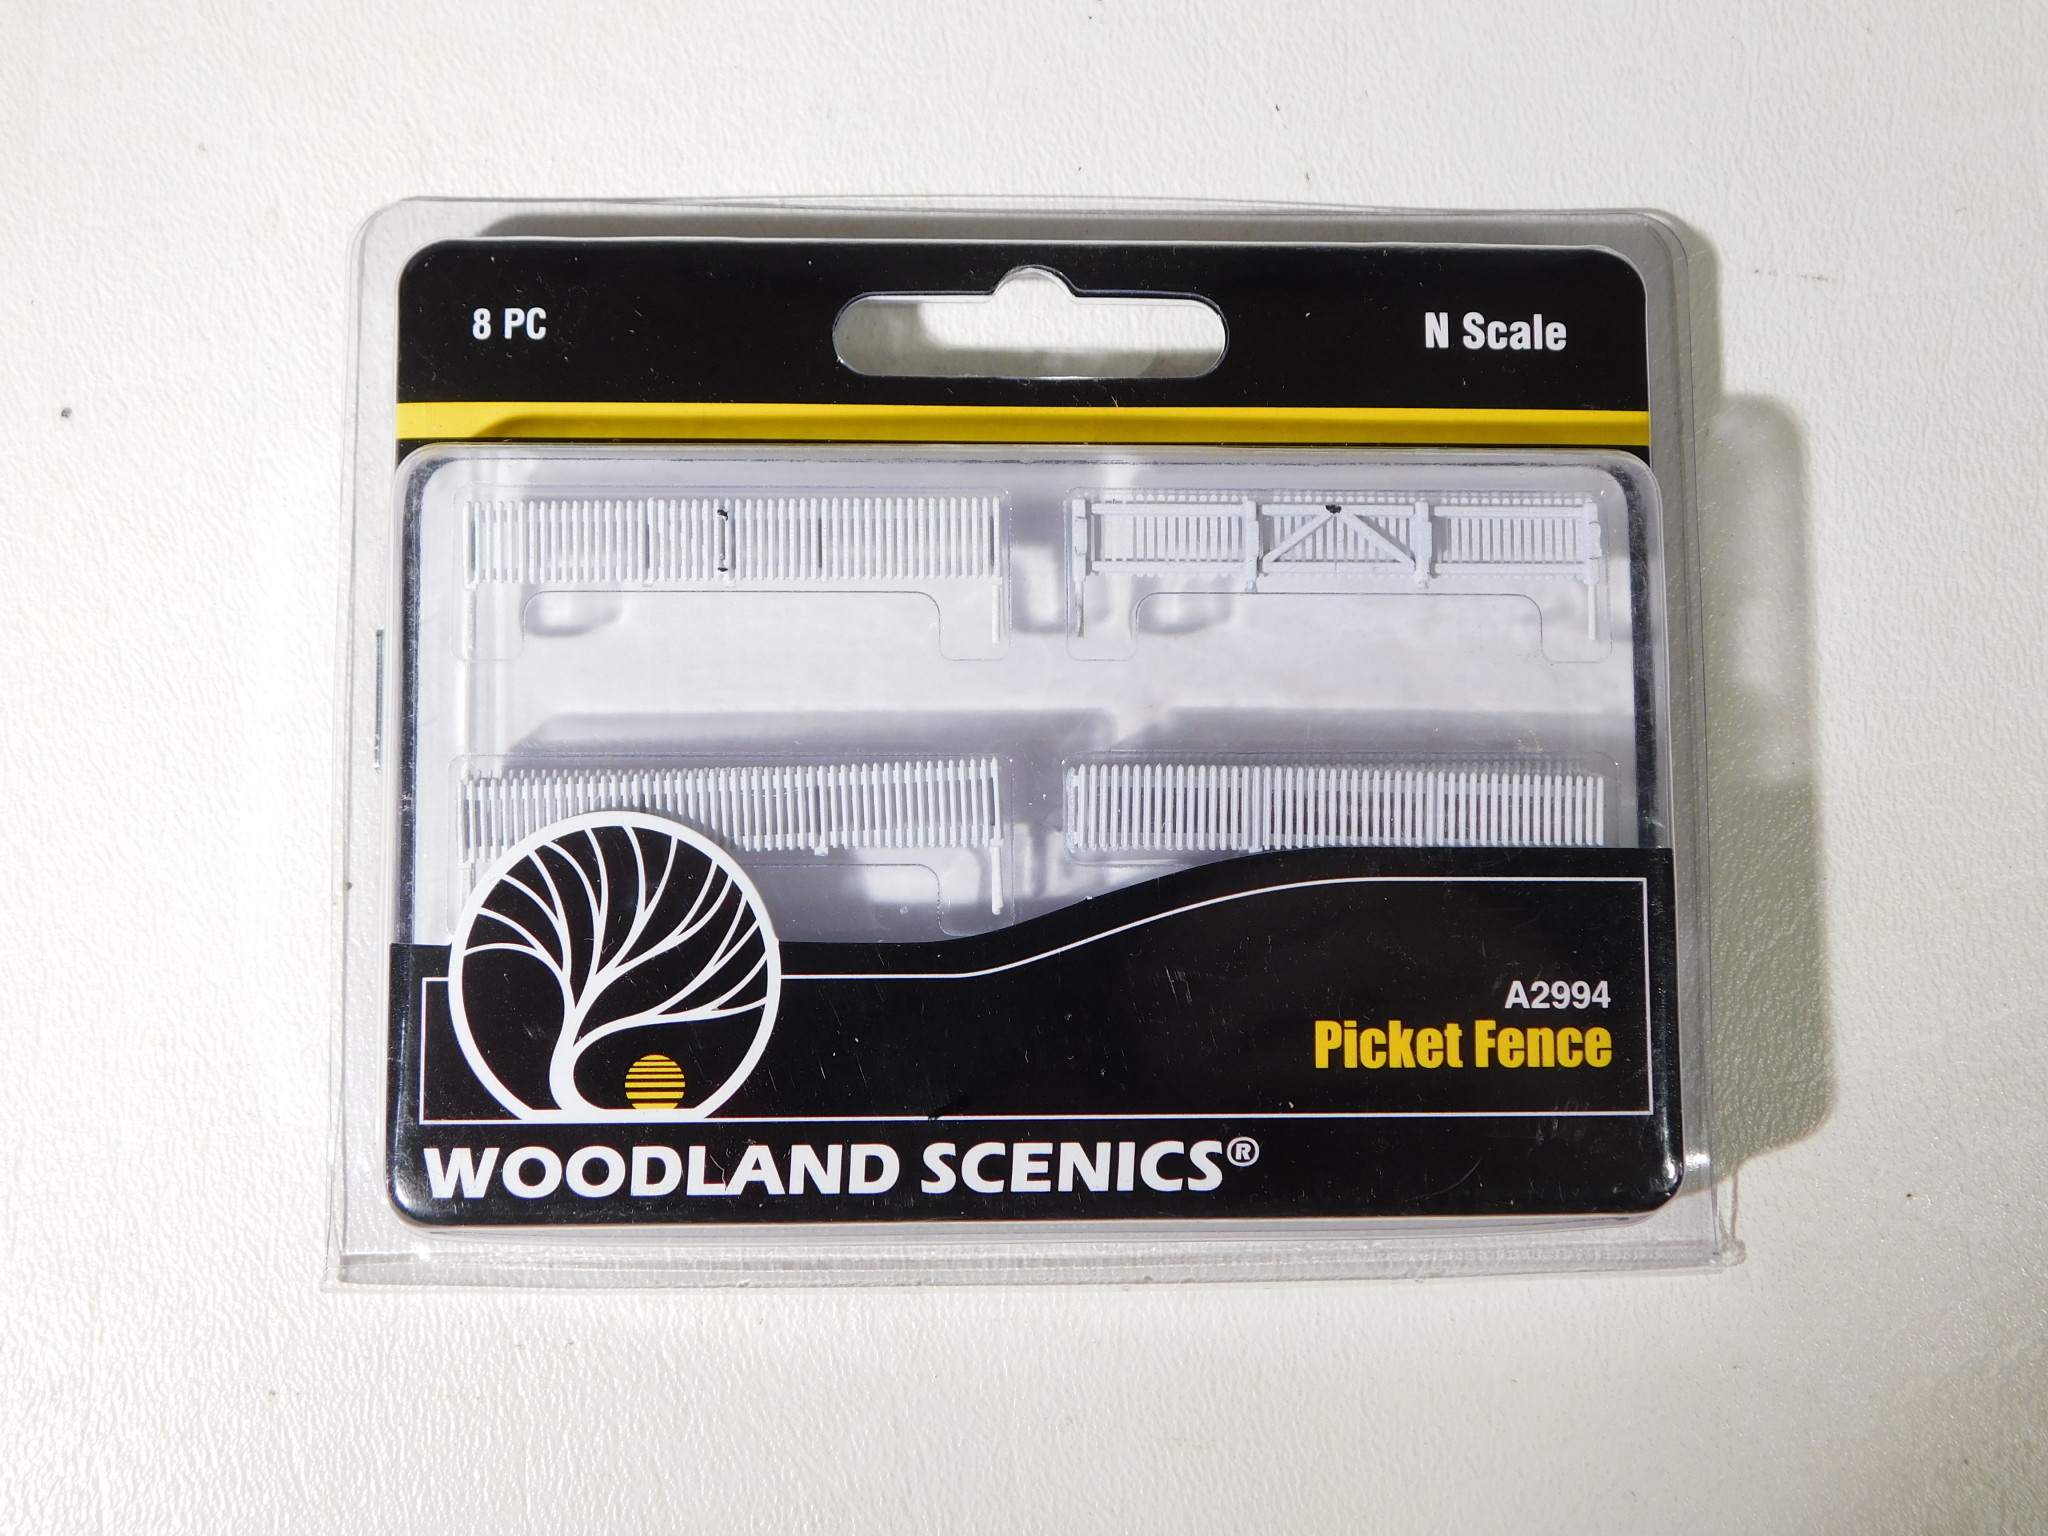 Woodland Scenics N Scale Picket Fence #A2994 #TOTES1